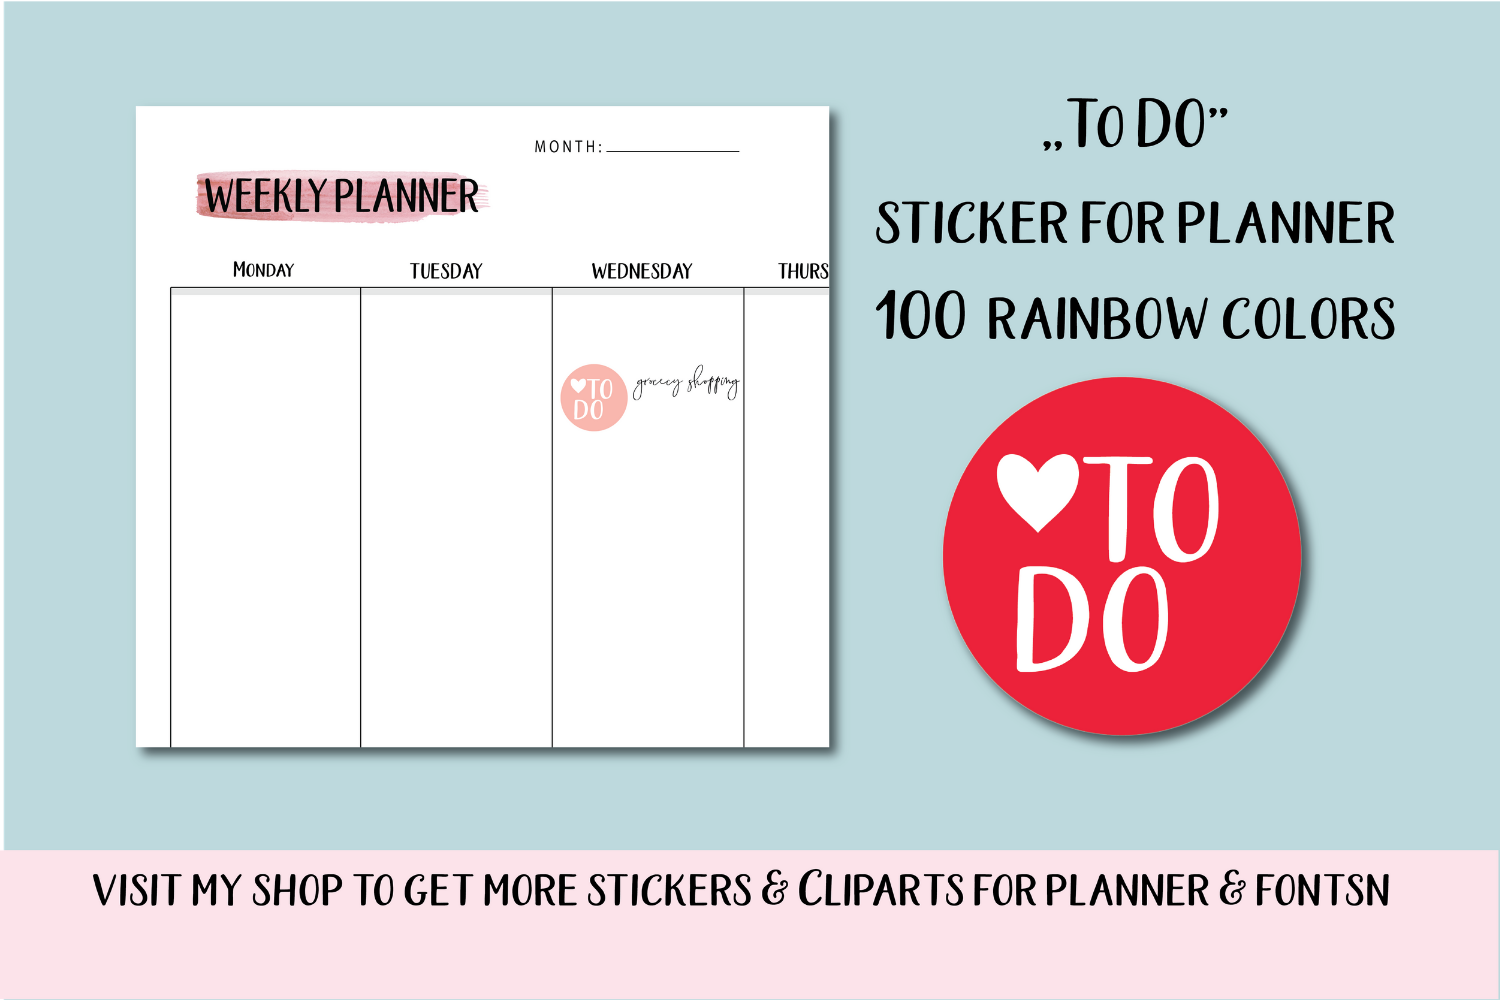 To Do Sticker Clipart To Do Digital Clipart To Do Printable Script By Old Continent Design Thehungryjpeg Com